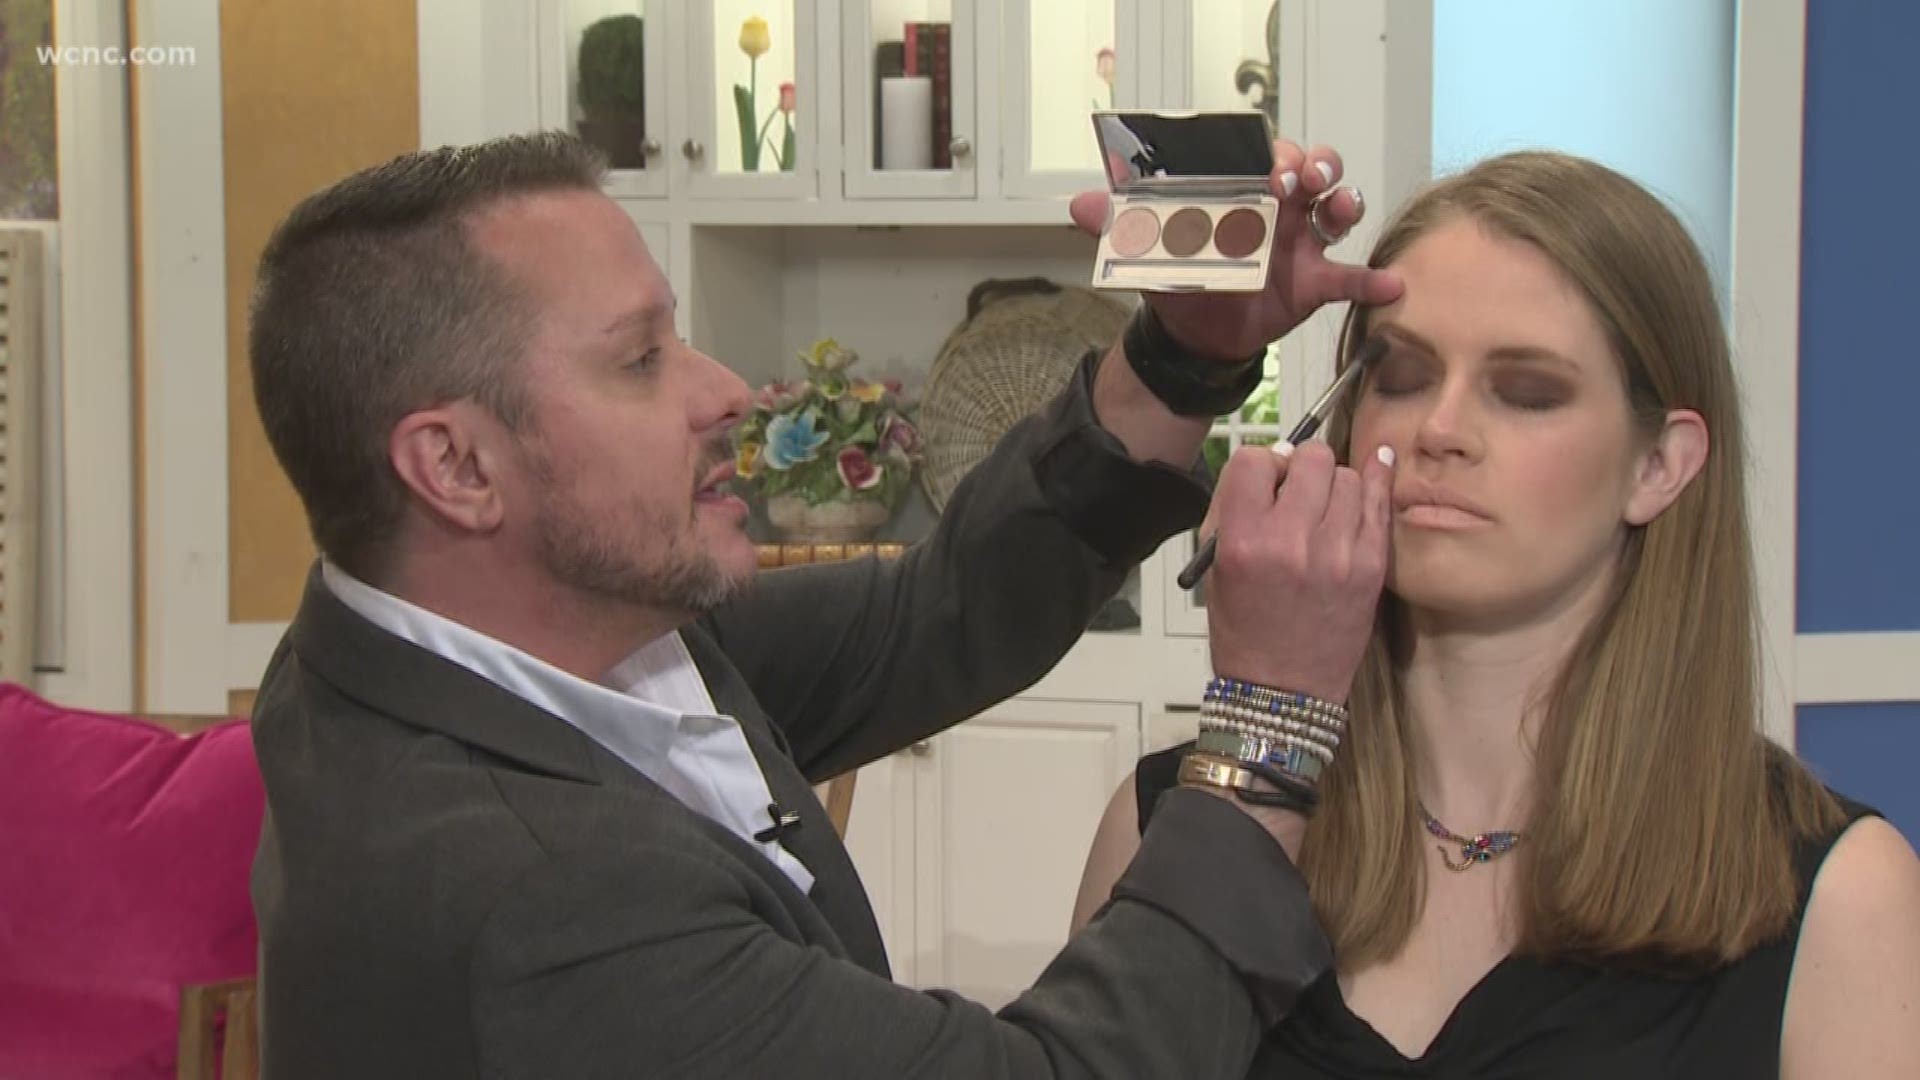 A smoky eye and nude lip looks great on everyone - if you do it right. Makeup artist, Stanley Owings, shares tips on how to master the look for any skin tone, eye shape or age.